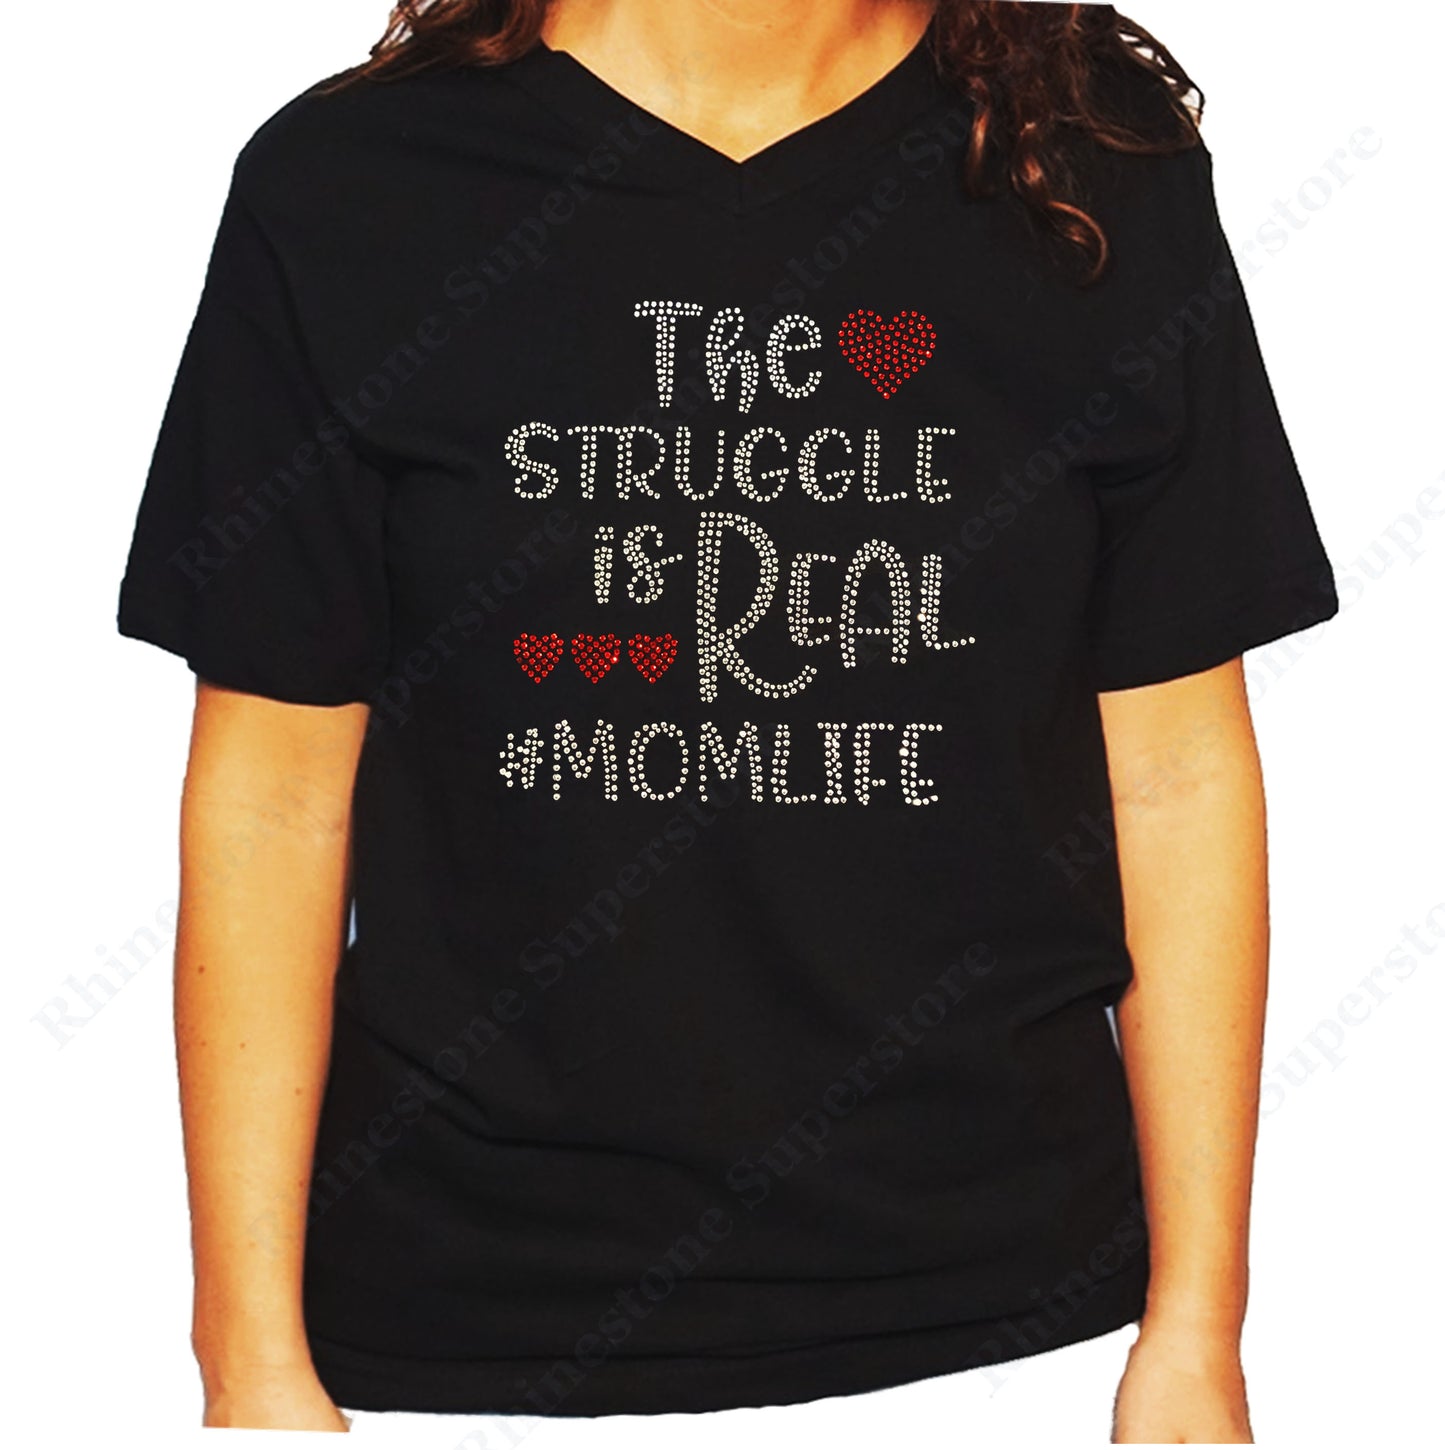 Women's / Unisex T-Shirt with The Struggle is Real #Momlife in Rhinestones